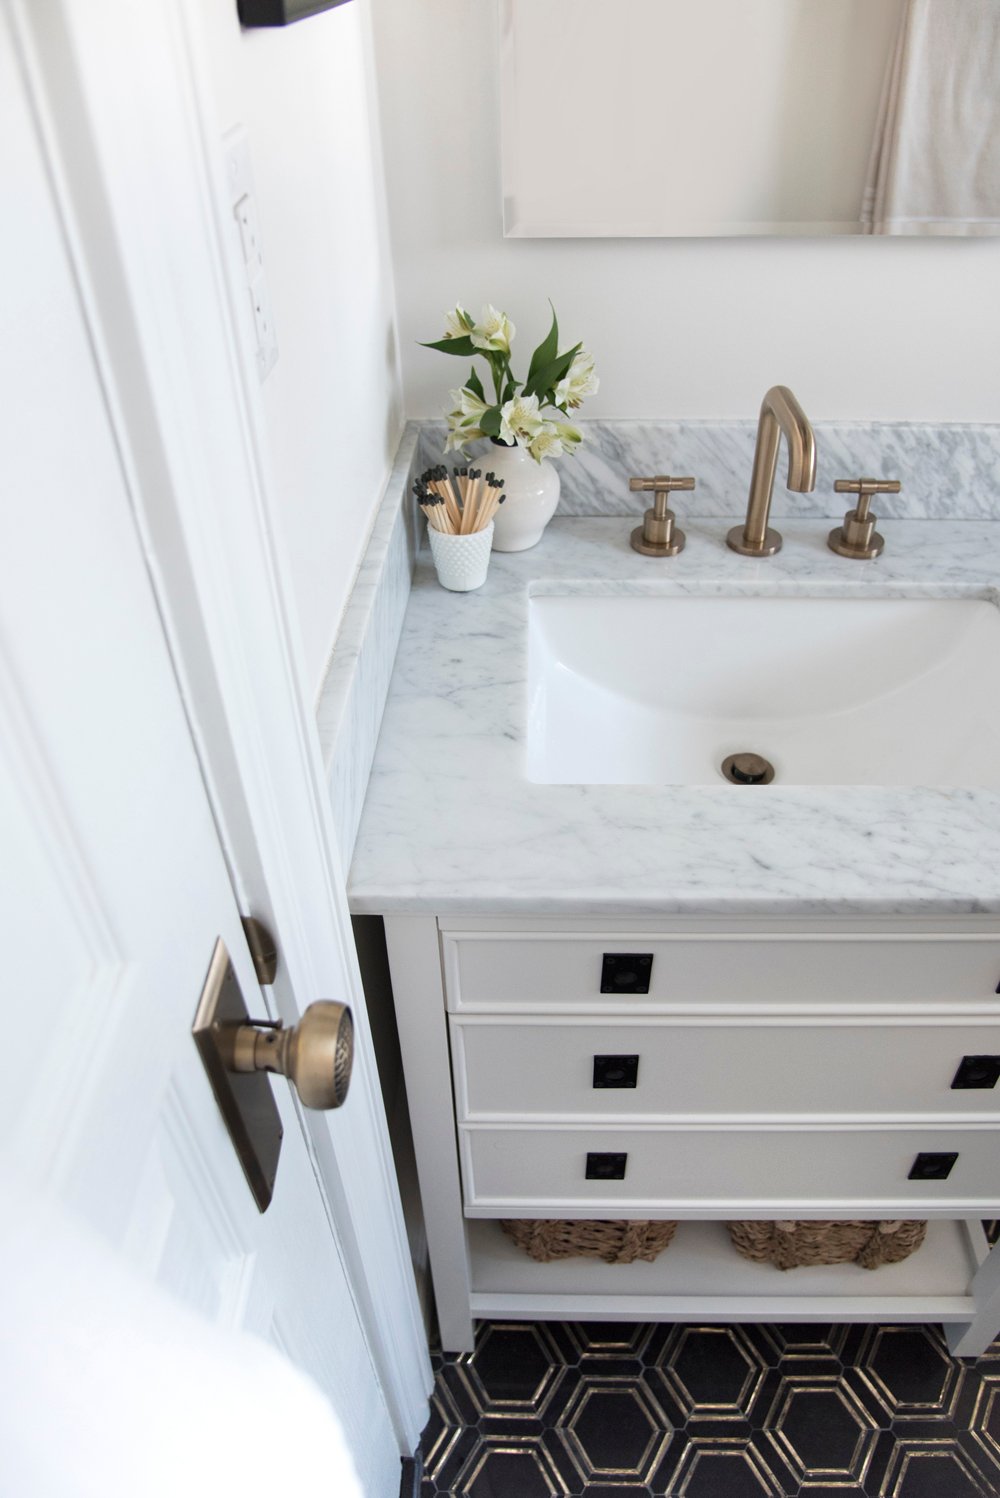 How We Choose : Widespread Bathroom Faucets - roomfortuesday.com